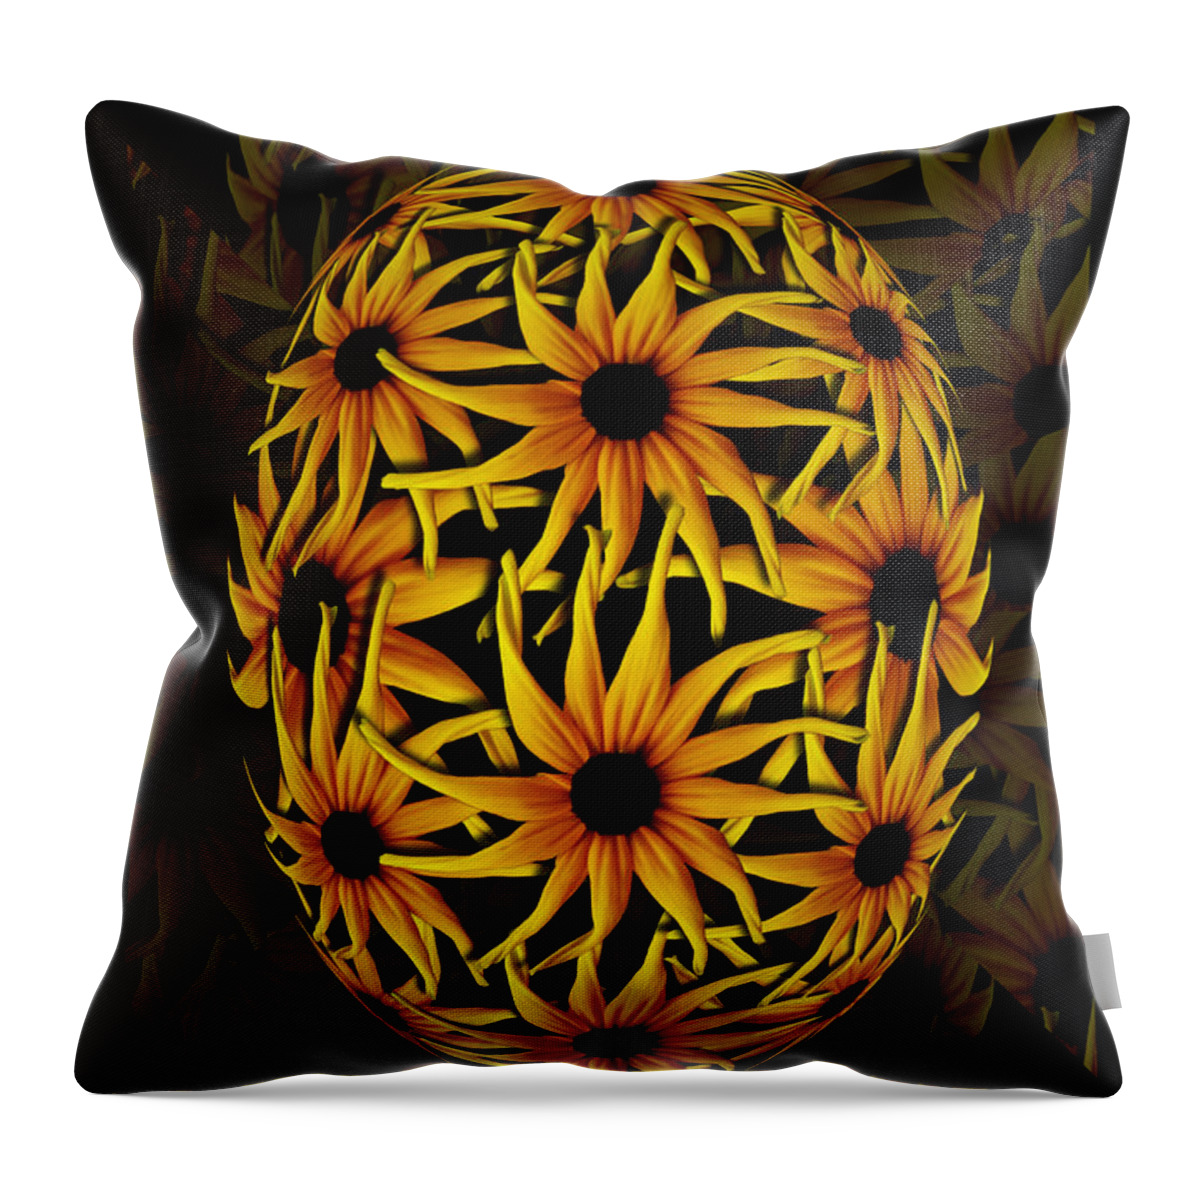 Yellow Sunflower Seed Throw Pillow featuring the photograph Yellow Sunflower Seed by Barbara St Jean